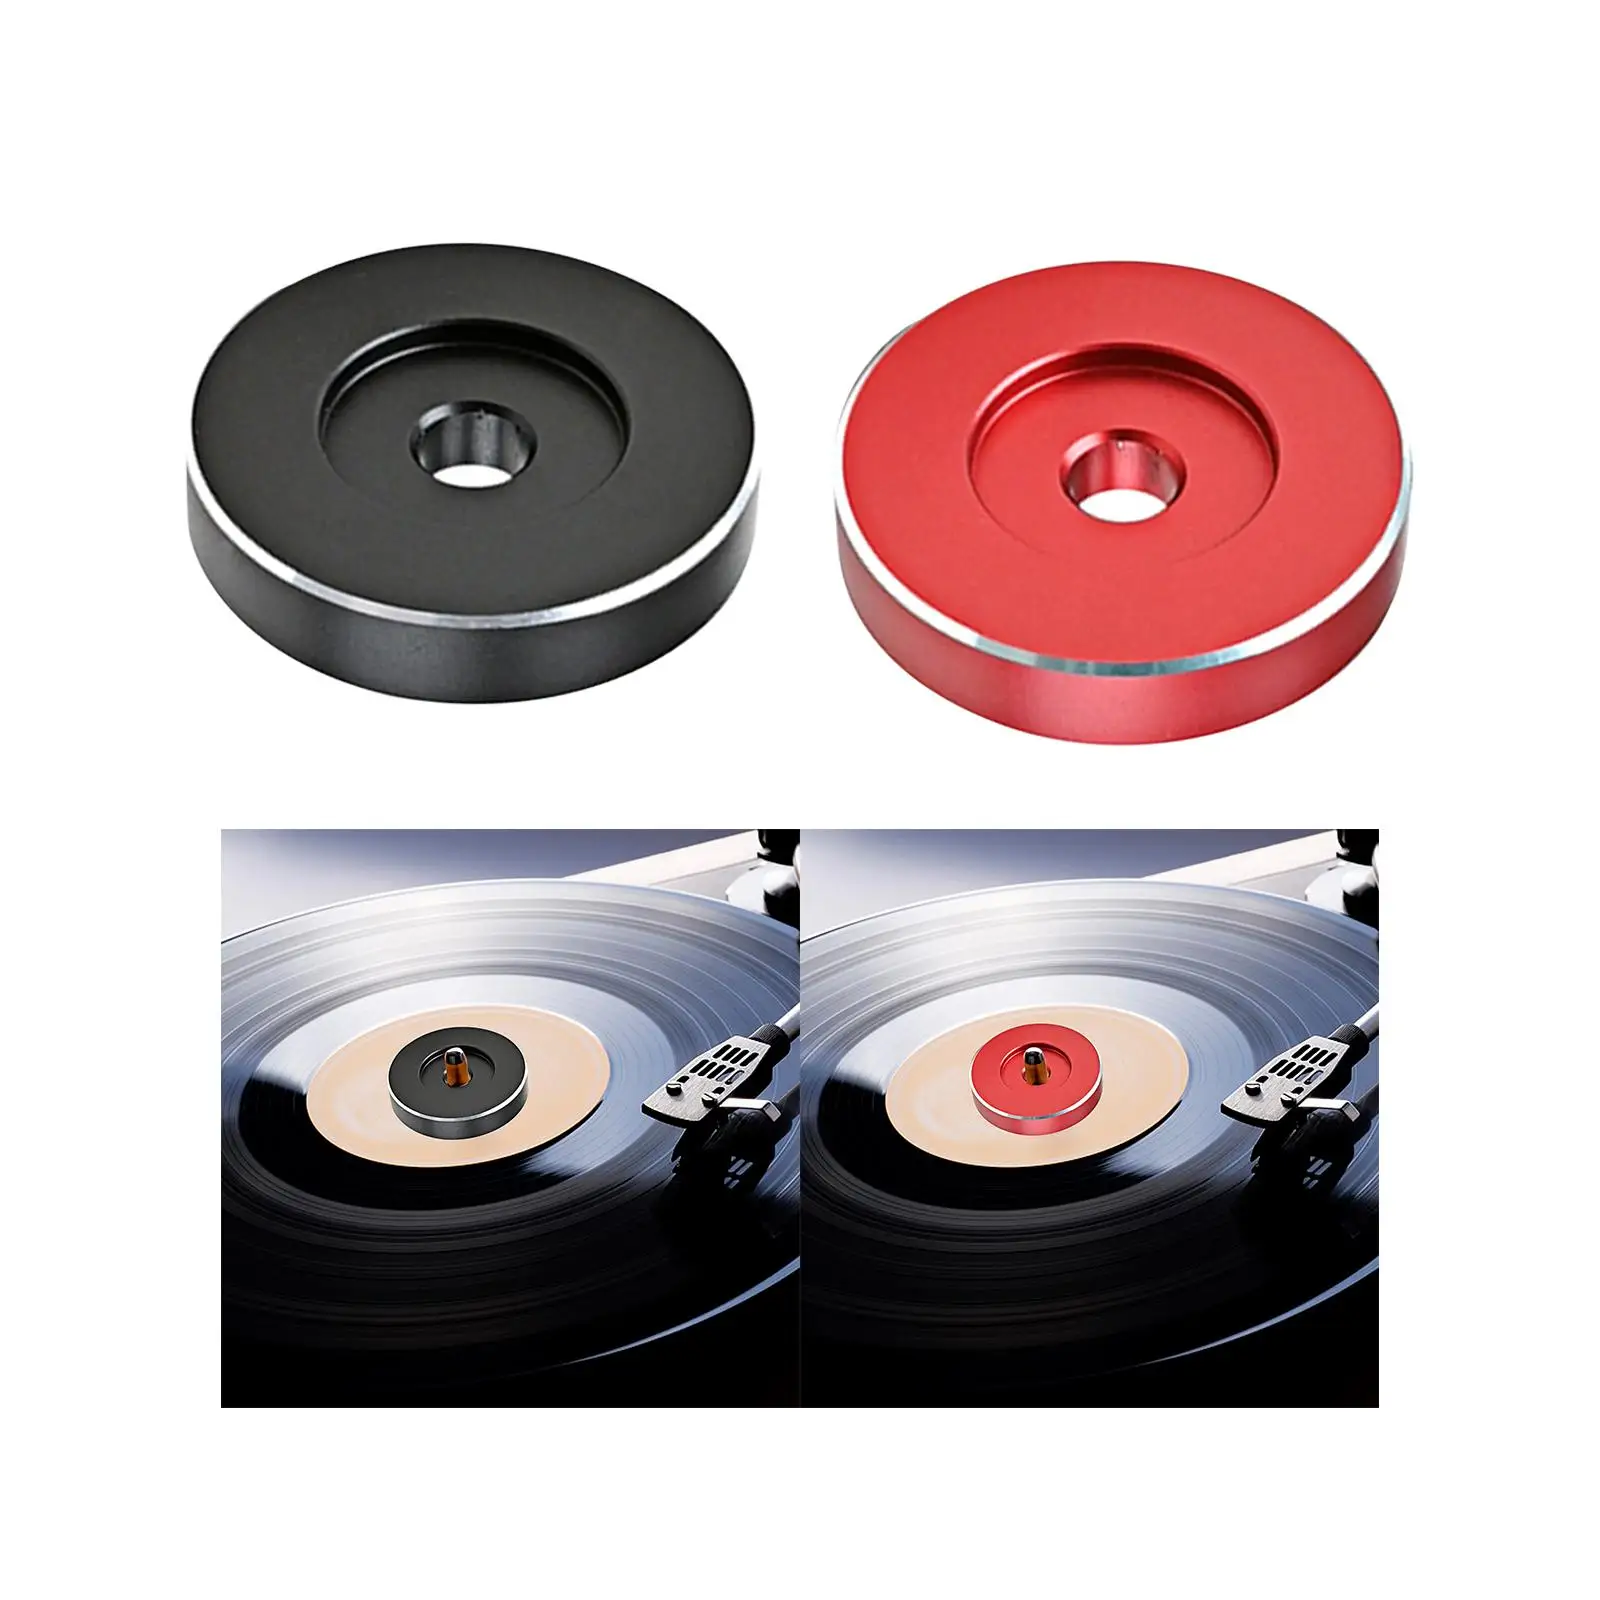 Multifunction Middle Adaptor Record Turntable Adapter for Accessories